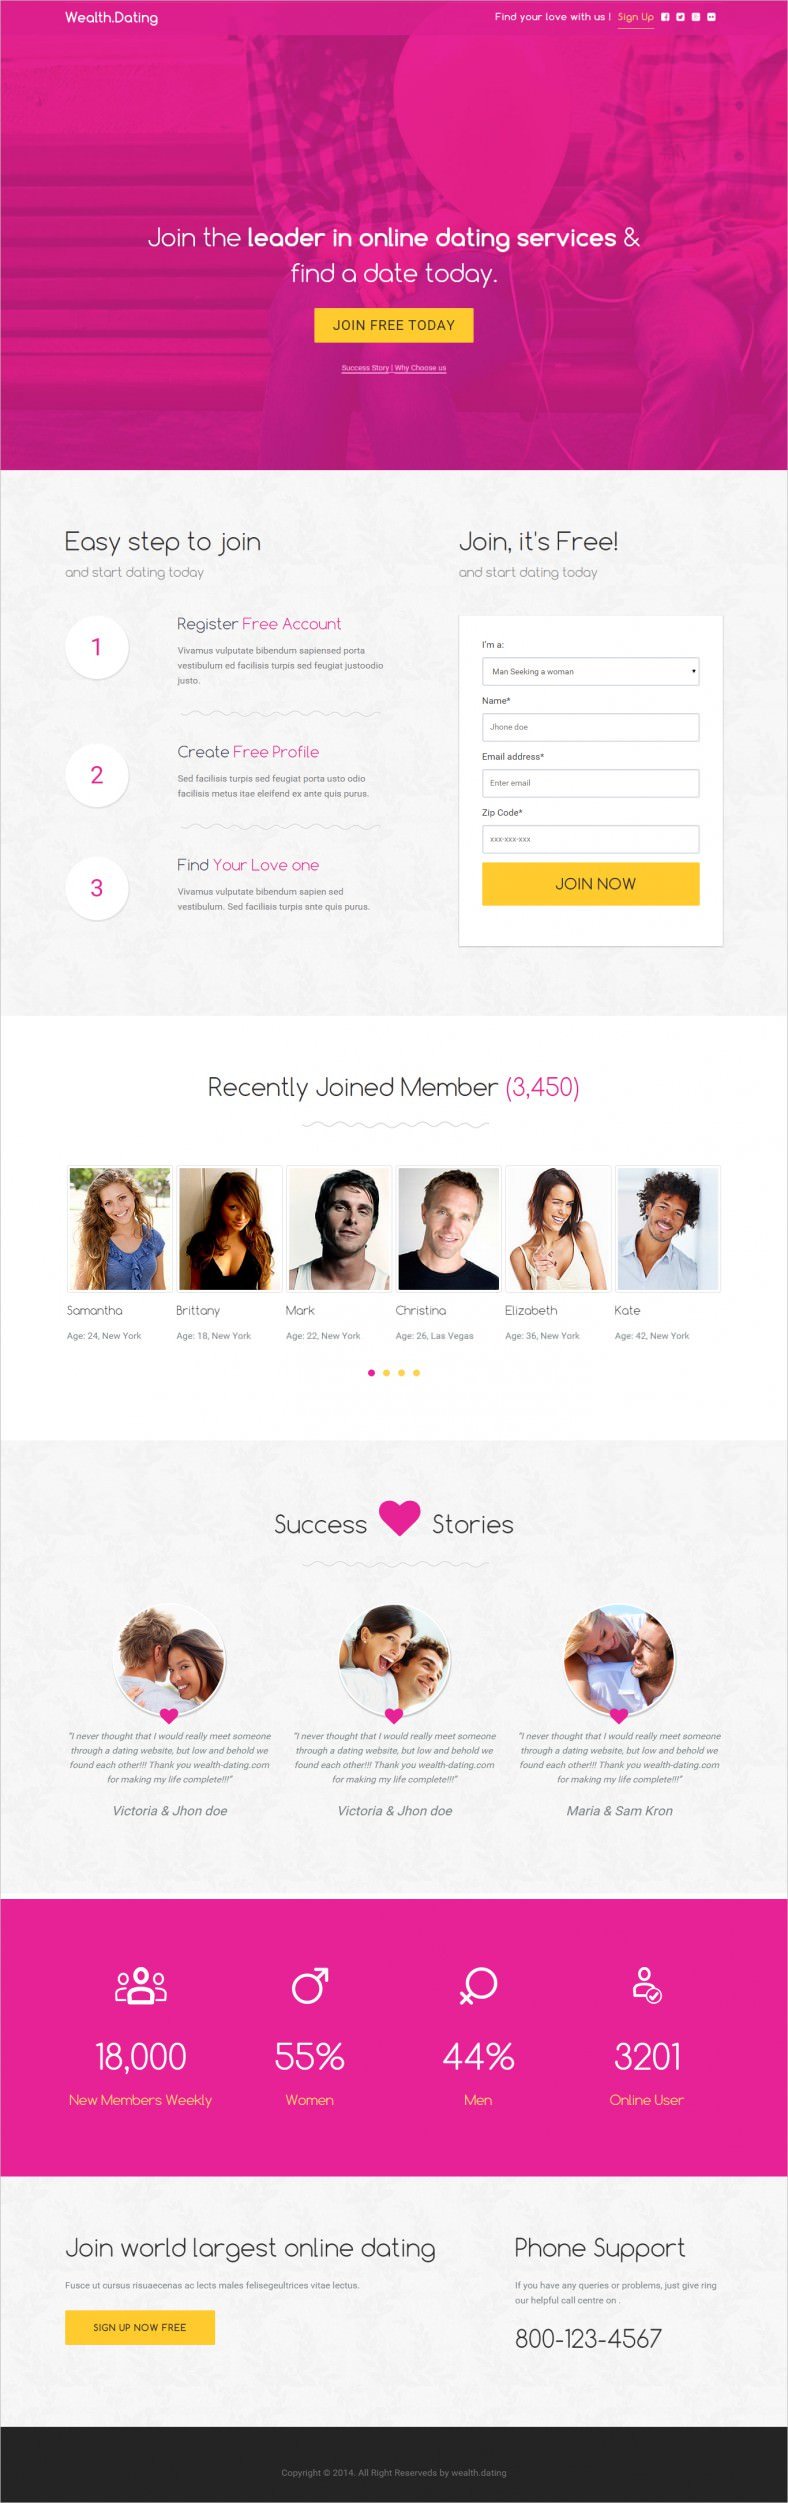 bootstrap responsive dating landing page template 788x250